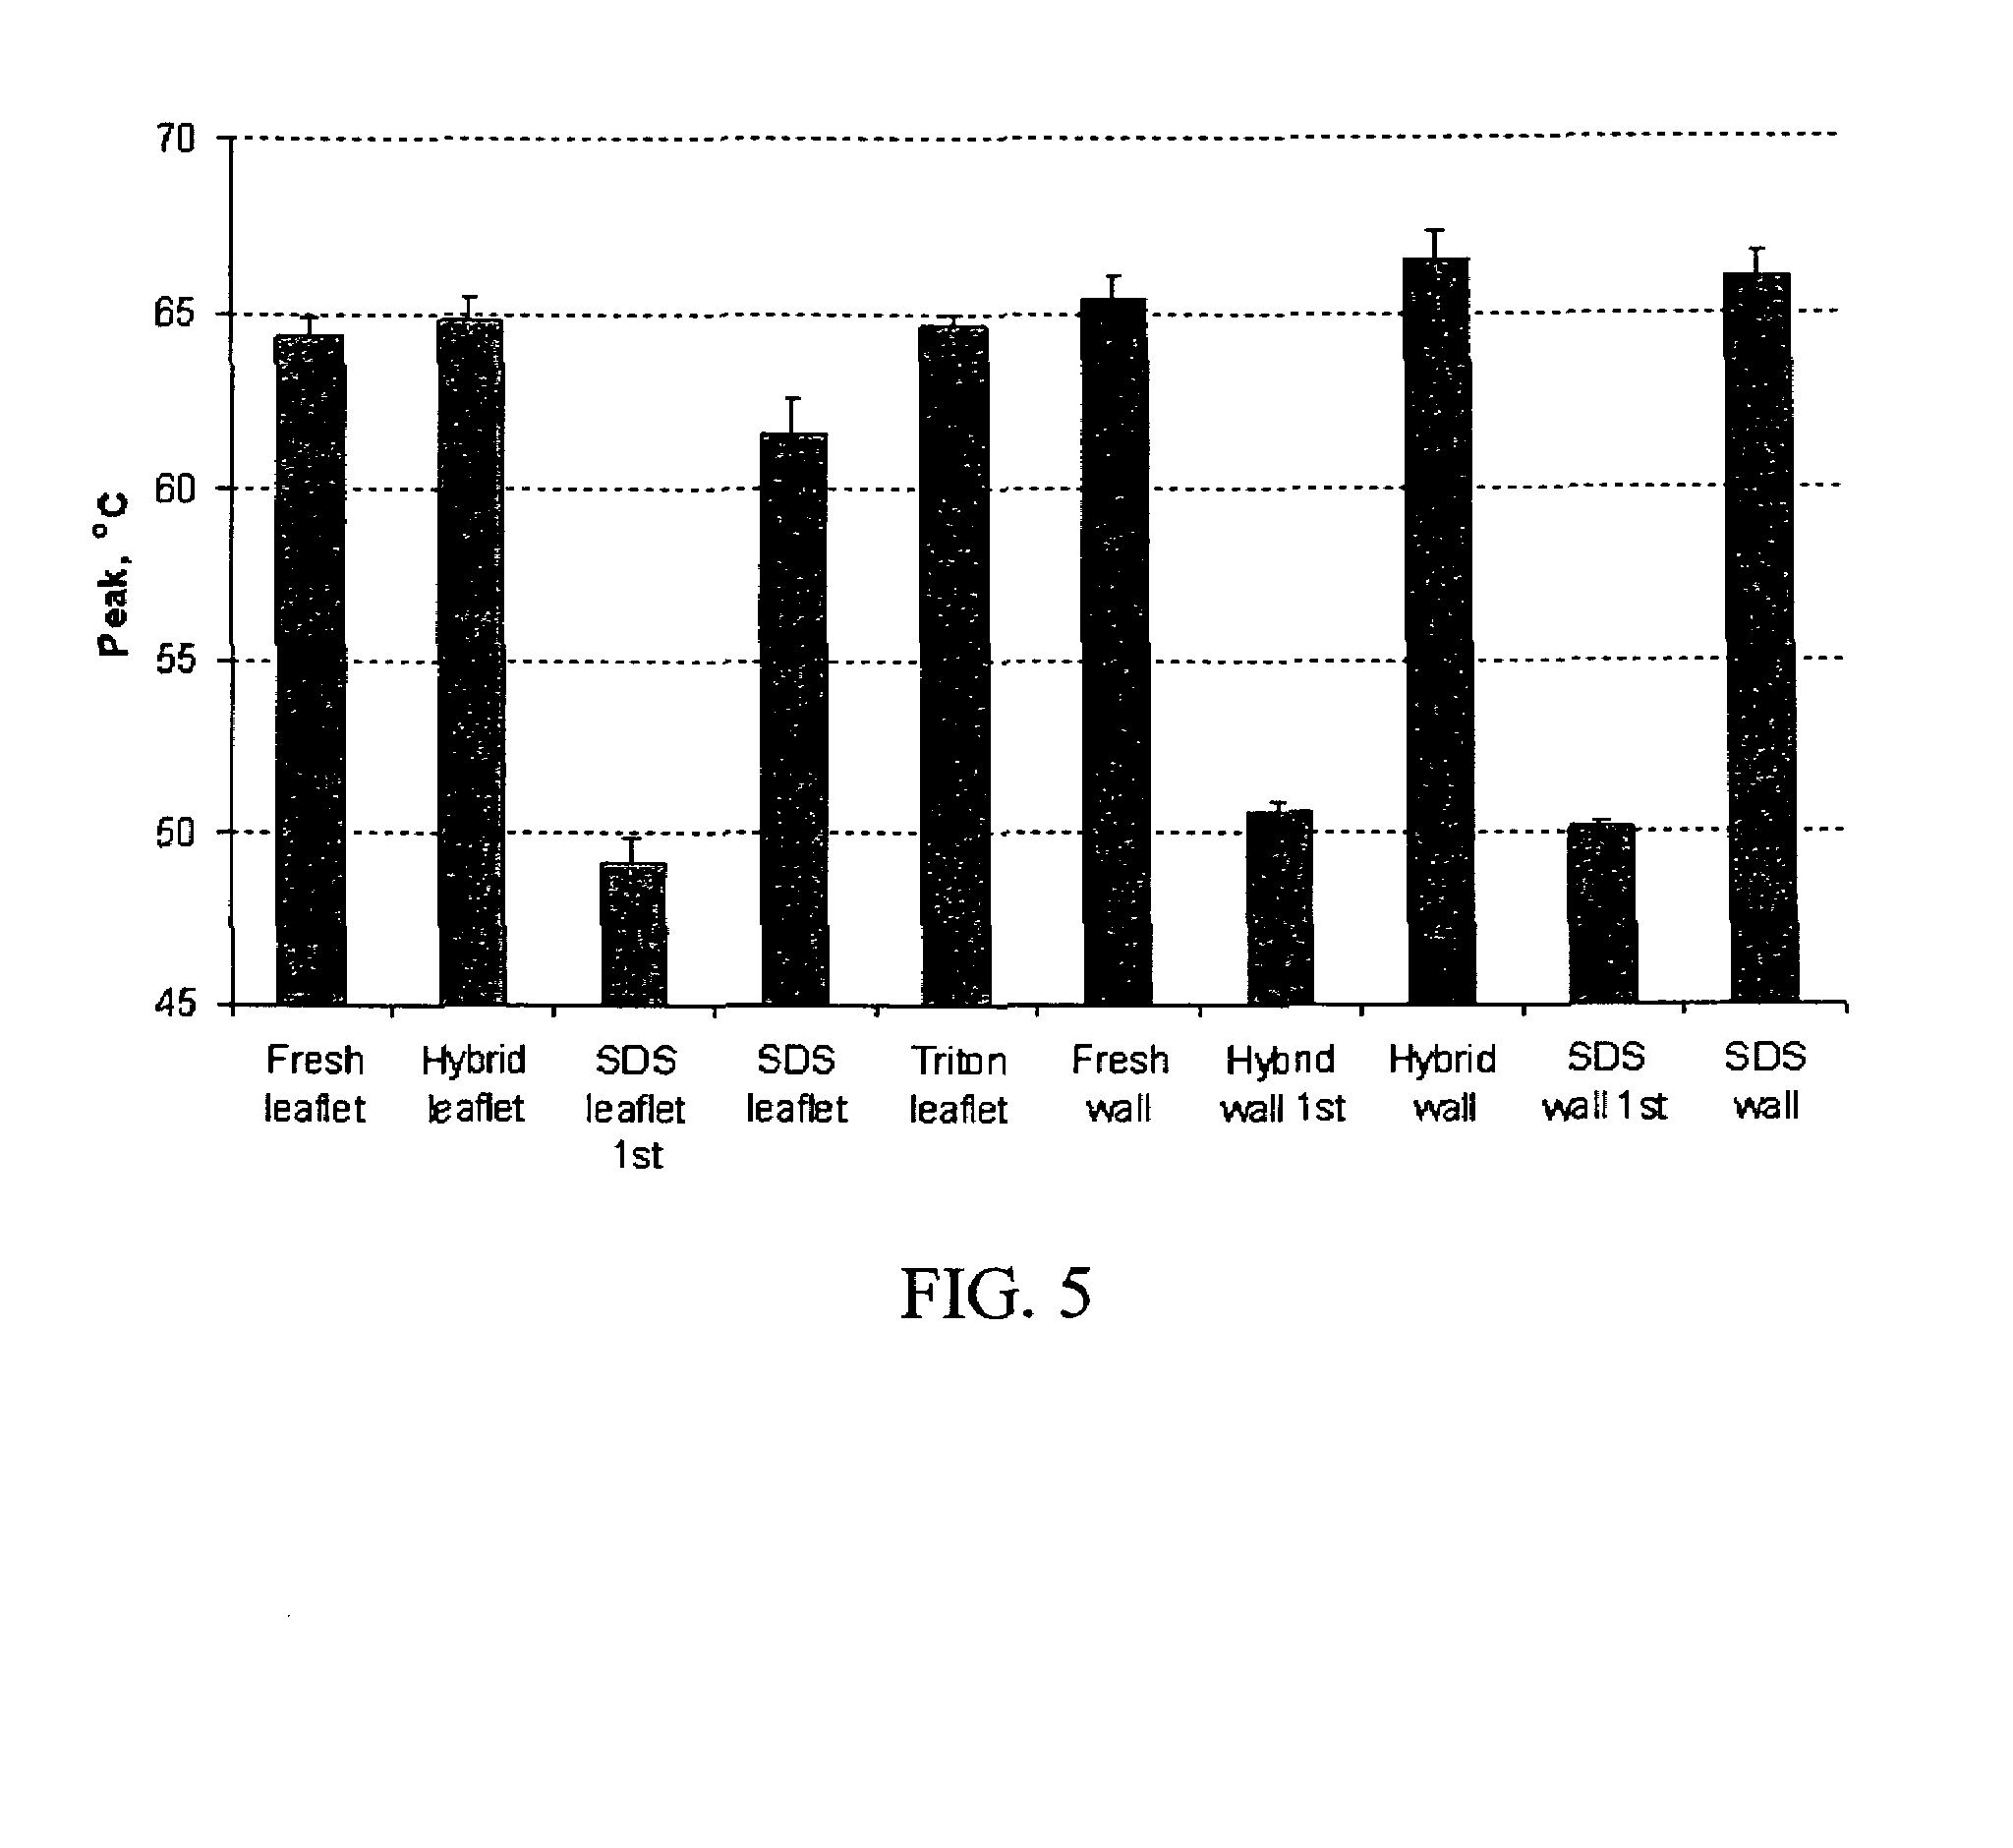 Process for reducing mineralization of tissue used in transplantation